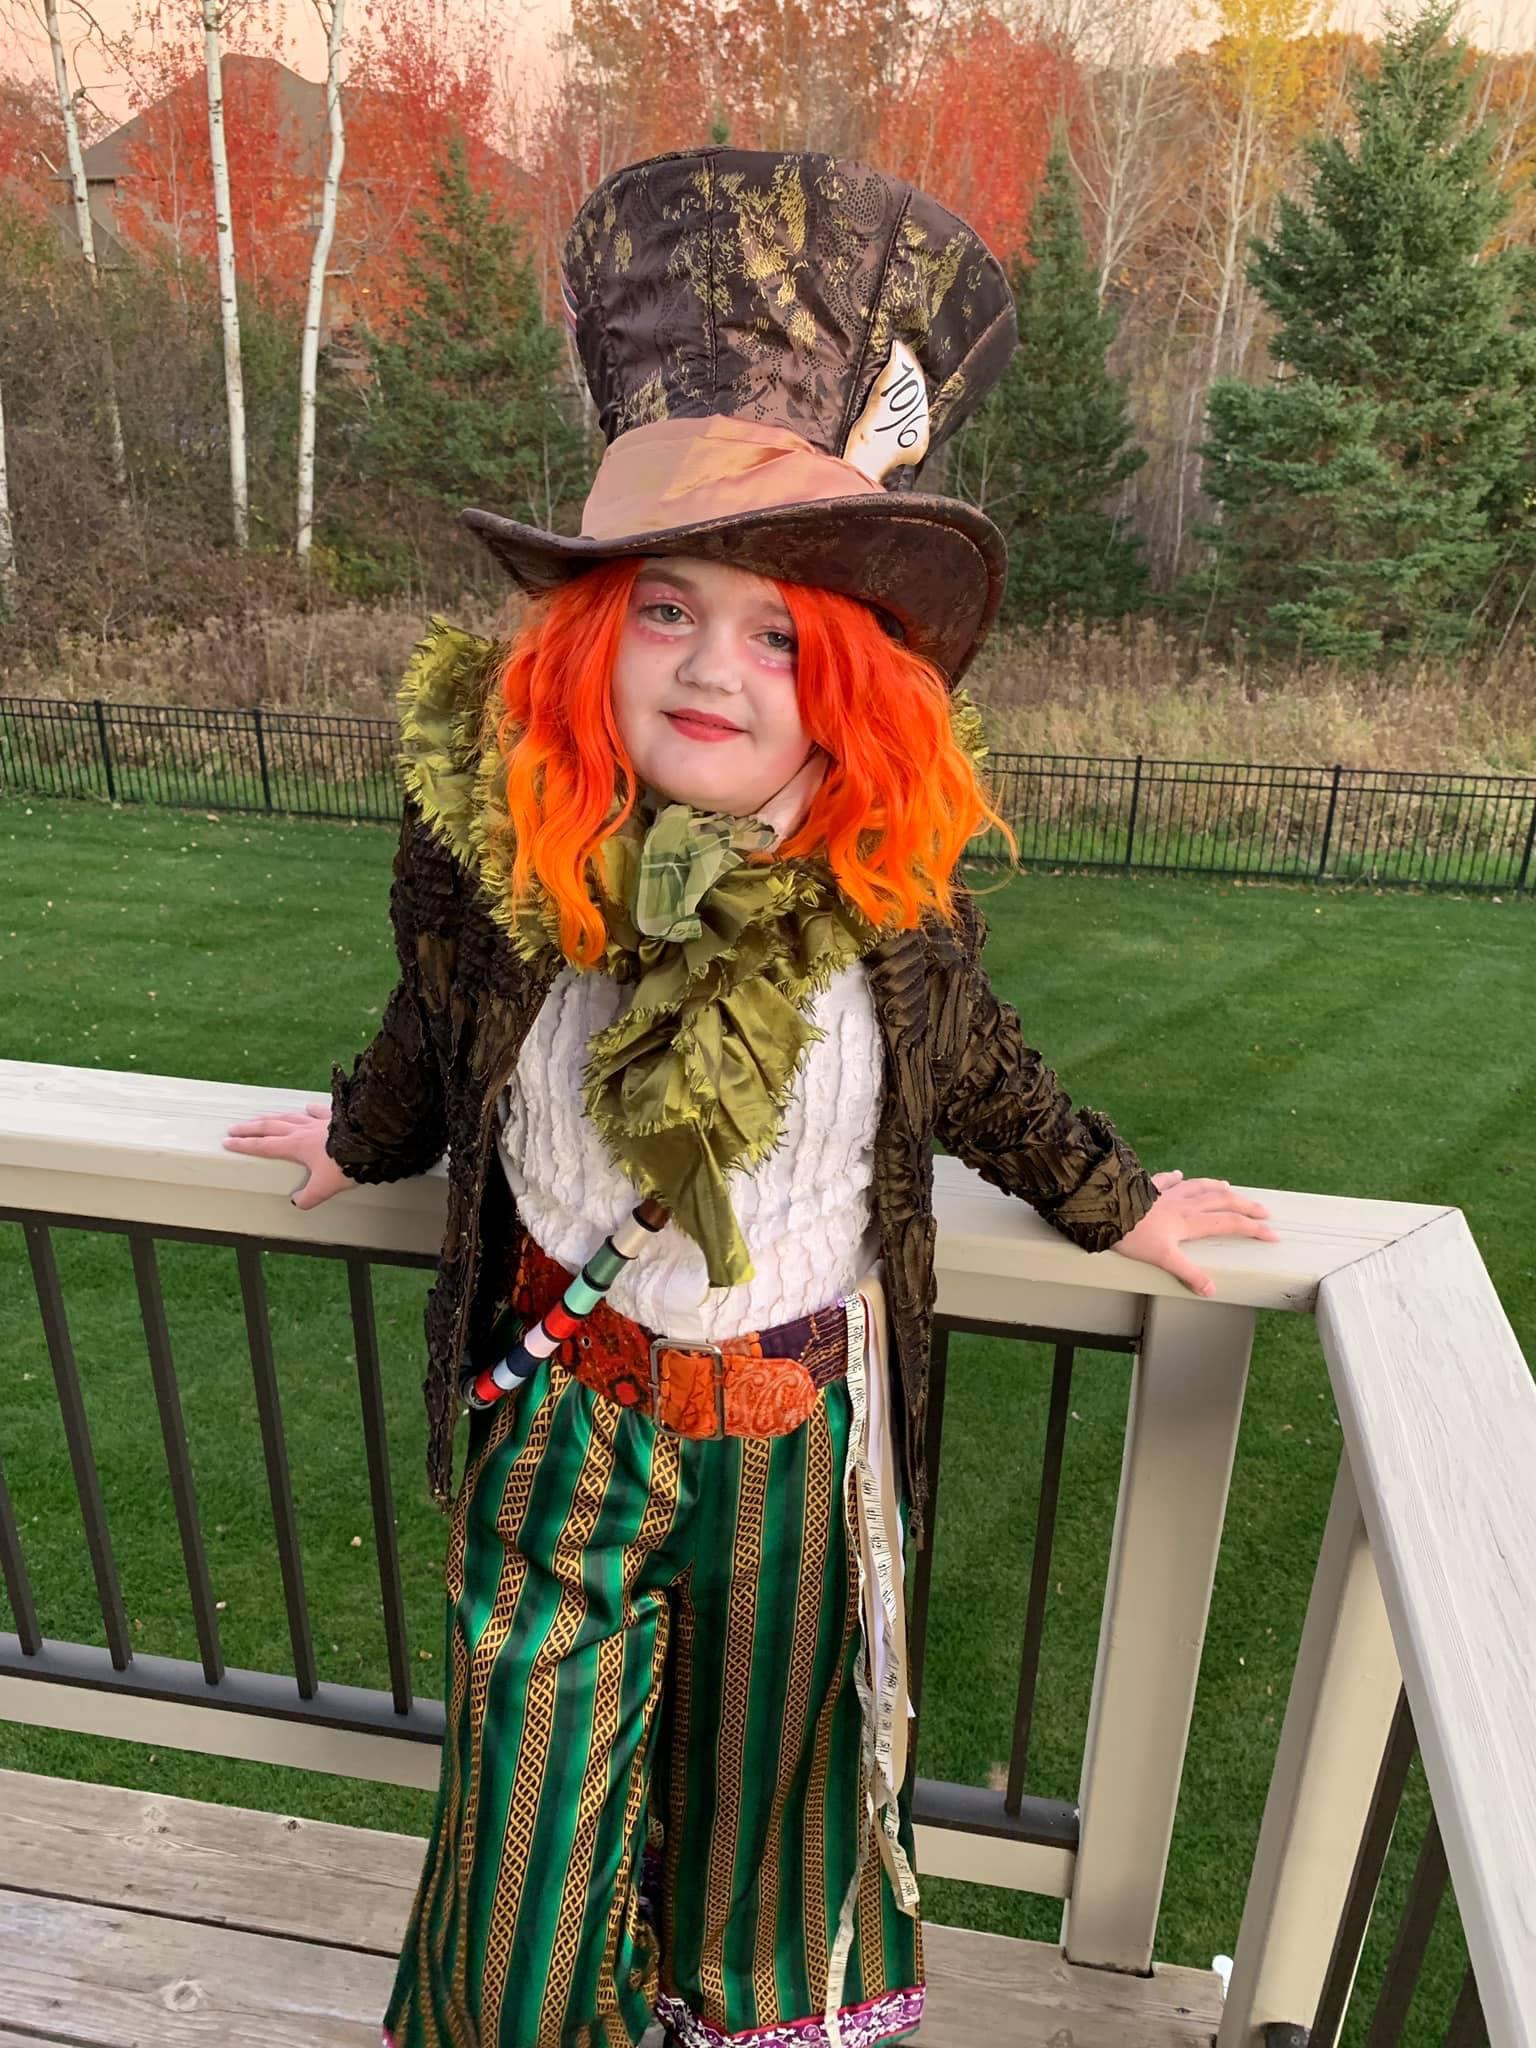 Costume-Hacking the Mad Hatter Costume for My Daughter!